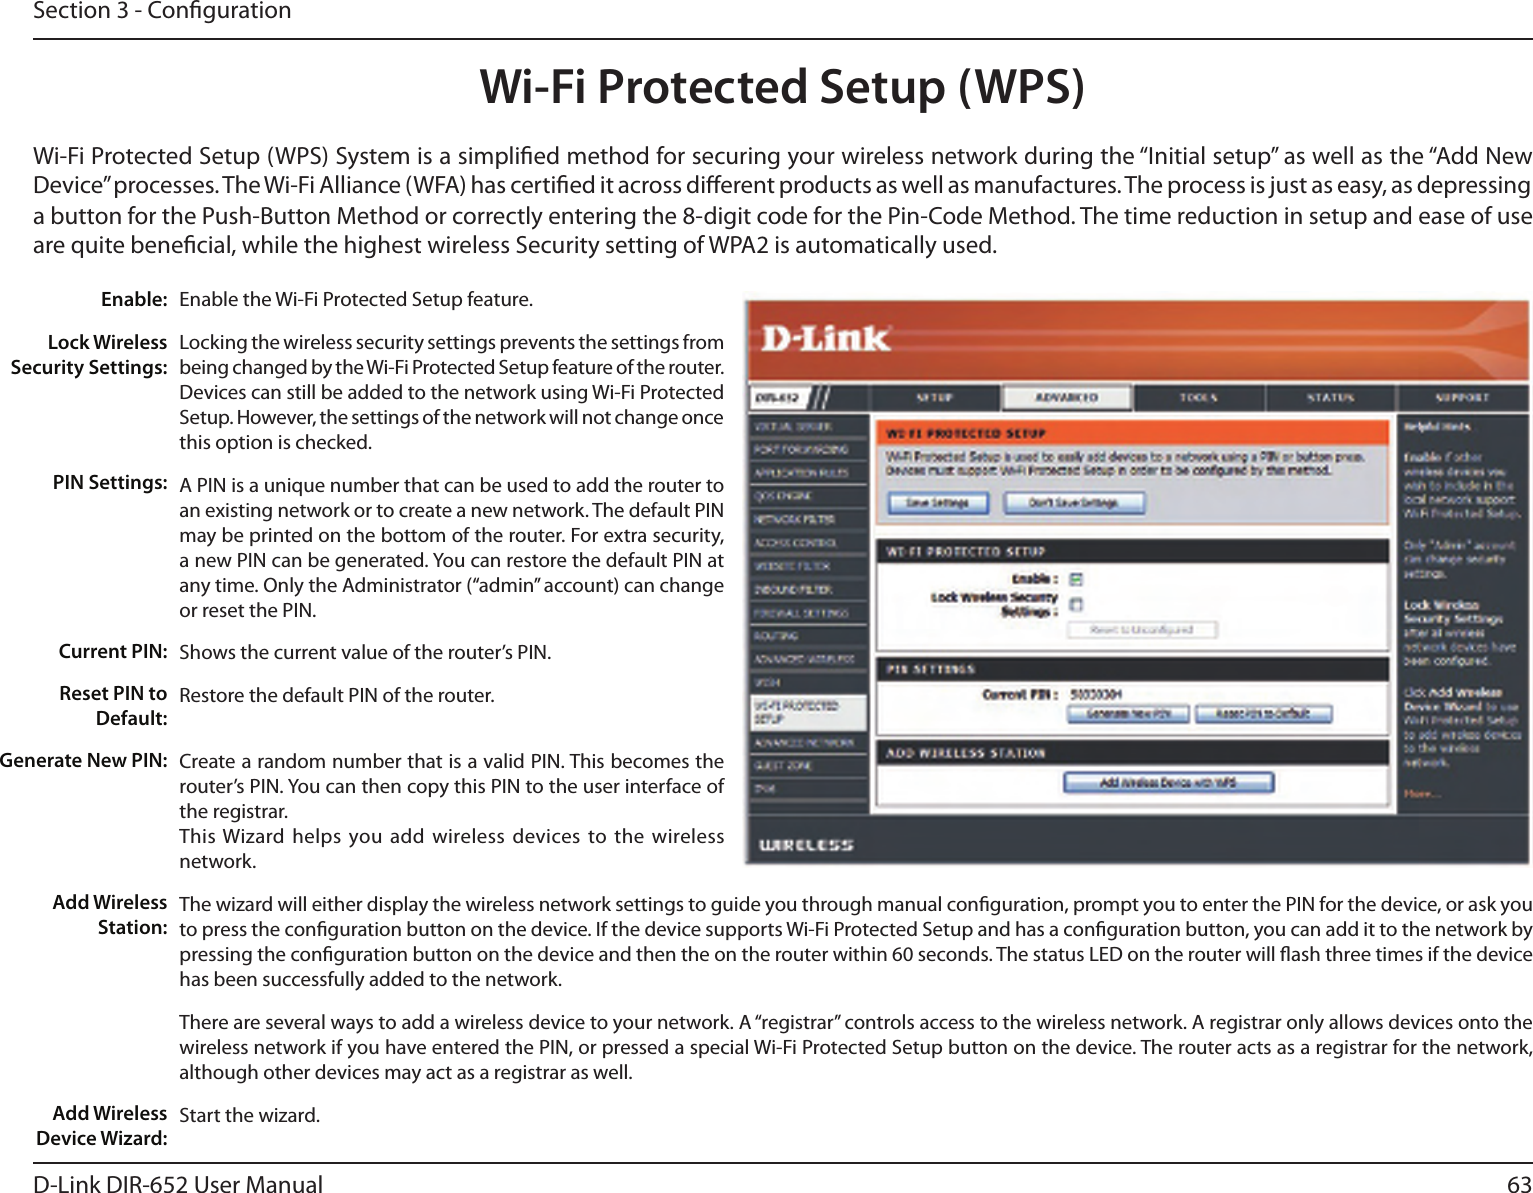 63D-Link DIR-652 User ManualSection 3 - CongurationWi-Fi Protected Setup (WPS)Enable the Wi-Fi Protected Setup feature. Locking the wireless security settings prevents the settings from being changed by the Wi-Fi Protected Setup feature of the router. Devices can still be added to the network using Wi-Fi Protected Setup. However, the settings of the network will not change once this option is checked.A PIN is a unique number that can be used to add the router to an existing network or to create a new network. The default PIN may be printed on the bottom of the router. For extra security, a new PIN can be generated. You can restore the default PIN at any time. Only the Administrator (“admin” account) can change or reset the PIN. Shows the current value of the router’s PIN. Restore the default PIN of the router. Create a random number that is a valid PIN. This becomes the router’s PIN. You can then copy this PIN to the user interface of the registrar.This Wizard  helps  you add wireless devices to  the  wireless network.The wizard will either display the wireless network settings to guide you through manual conguration, prompt you to enter the PIN for the device, or ask you to press the conguration button on the device. If the device supports Wi-Fi Protected Setup and has a conguration button, you can add it to the network by pressing the conguration button on the device and then the on the router within 60 seconds. The status LED on the router will ash three times if the device has been successfully added to the network.There are several ways to add a wireless device to your network. A “registrar” controls access to the wireless network. A registrar only allows devices onto the wireless network if you have entered the PIN, or pressed a special Wi-Fi Protected Setup button on the device. The router acts as a registrar for the network, although other devices may act as a registrar as well.Start the wizard.Enable:Lock Wireless Security Settings:PIN Settings:Current PIN:Reset PIN to Default:Generate New PIN:Add Wireless Station:Add Wireless Device Wizard:Wi-Fi Protected Setup (WPS) System is a simplied method for securing your wireless network during the “Initial setup” as well as the “Add New Device” processes. The Wi-Fi Alliance (WFA) has certied it across dierent products as well as manufactures. The process is just as easy, as depressing a button for the Push-Button Method or correctly entering the 8-digit code for the Pin-Code Method. The time reduction in setup and ease of use are quite benecial, while the highest wireless Security setting of WPA2 is automatically used.